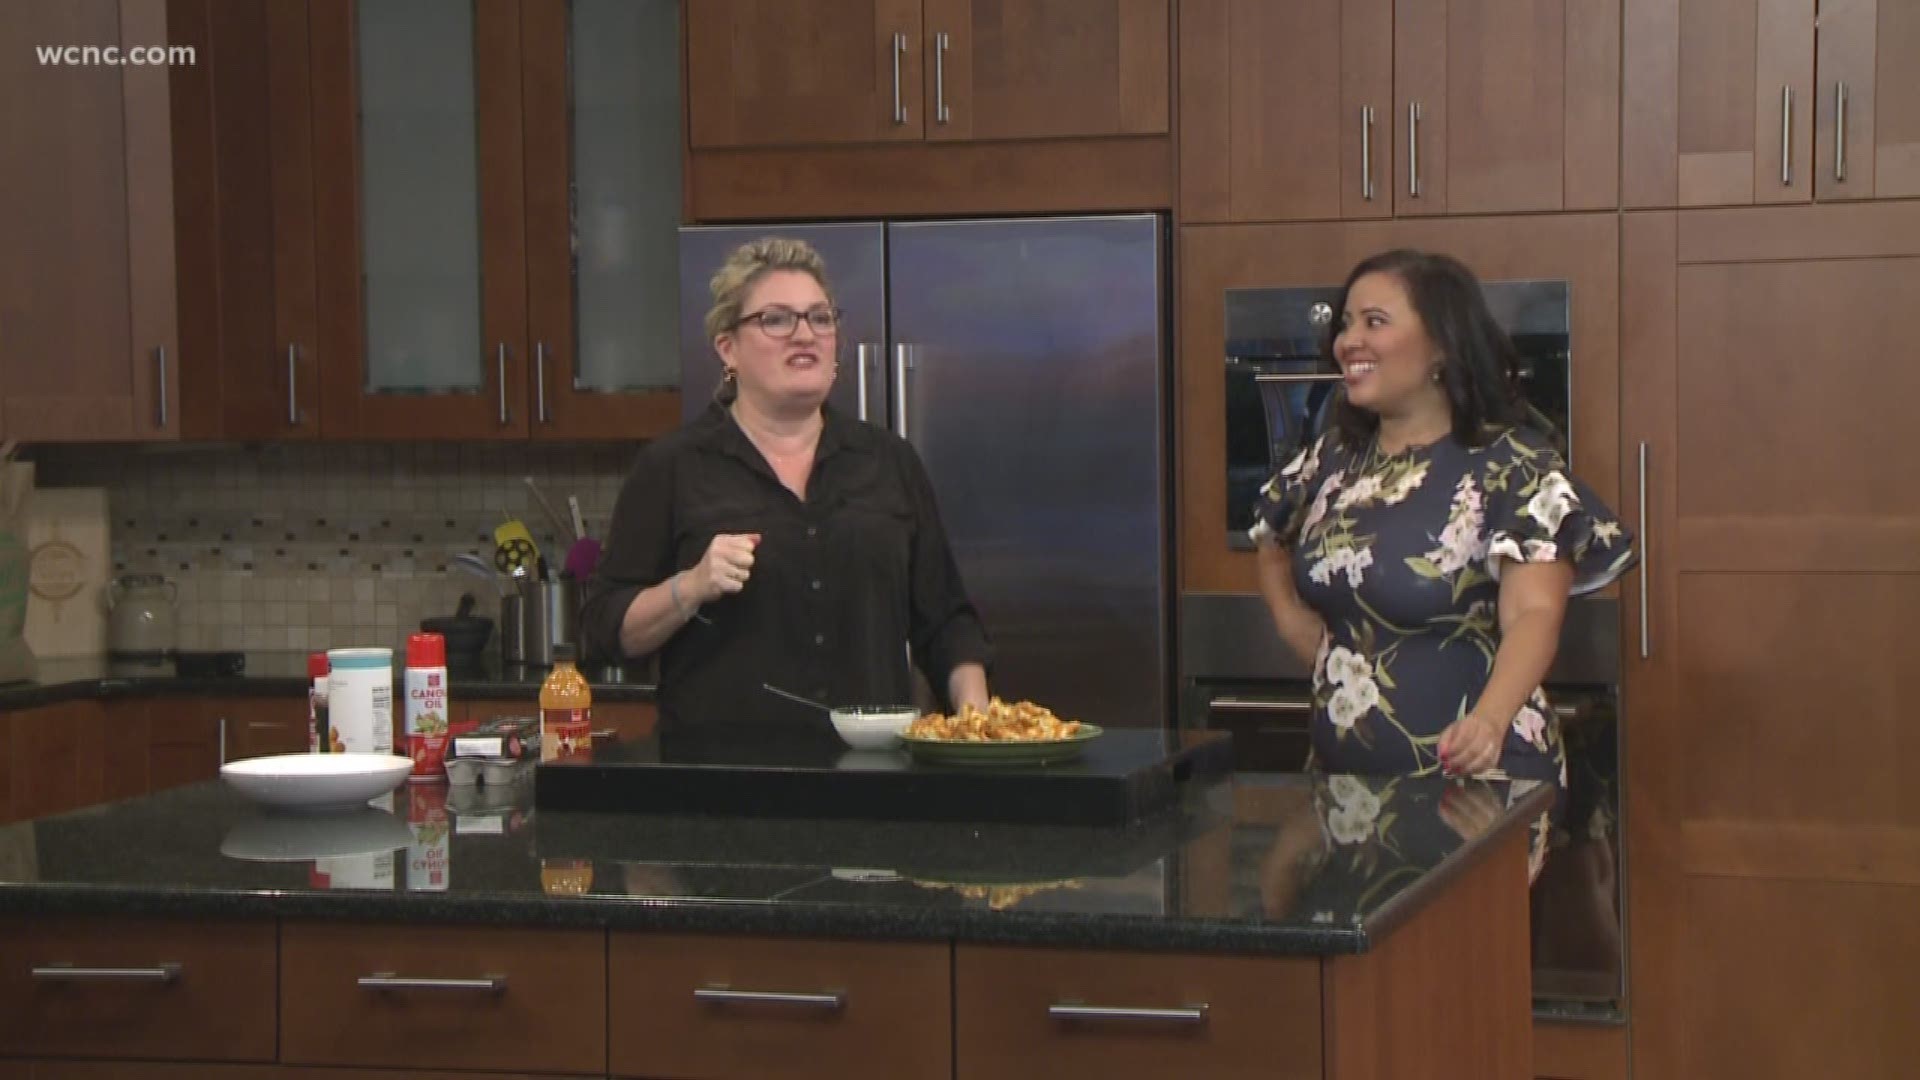 Chef Jenny brought the heat to WCNC with some Buffalo Cauliflower bites.